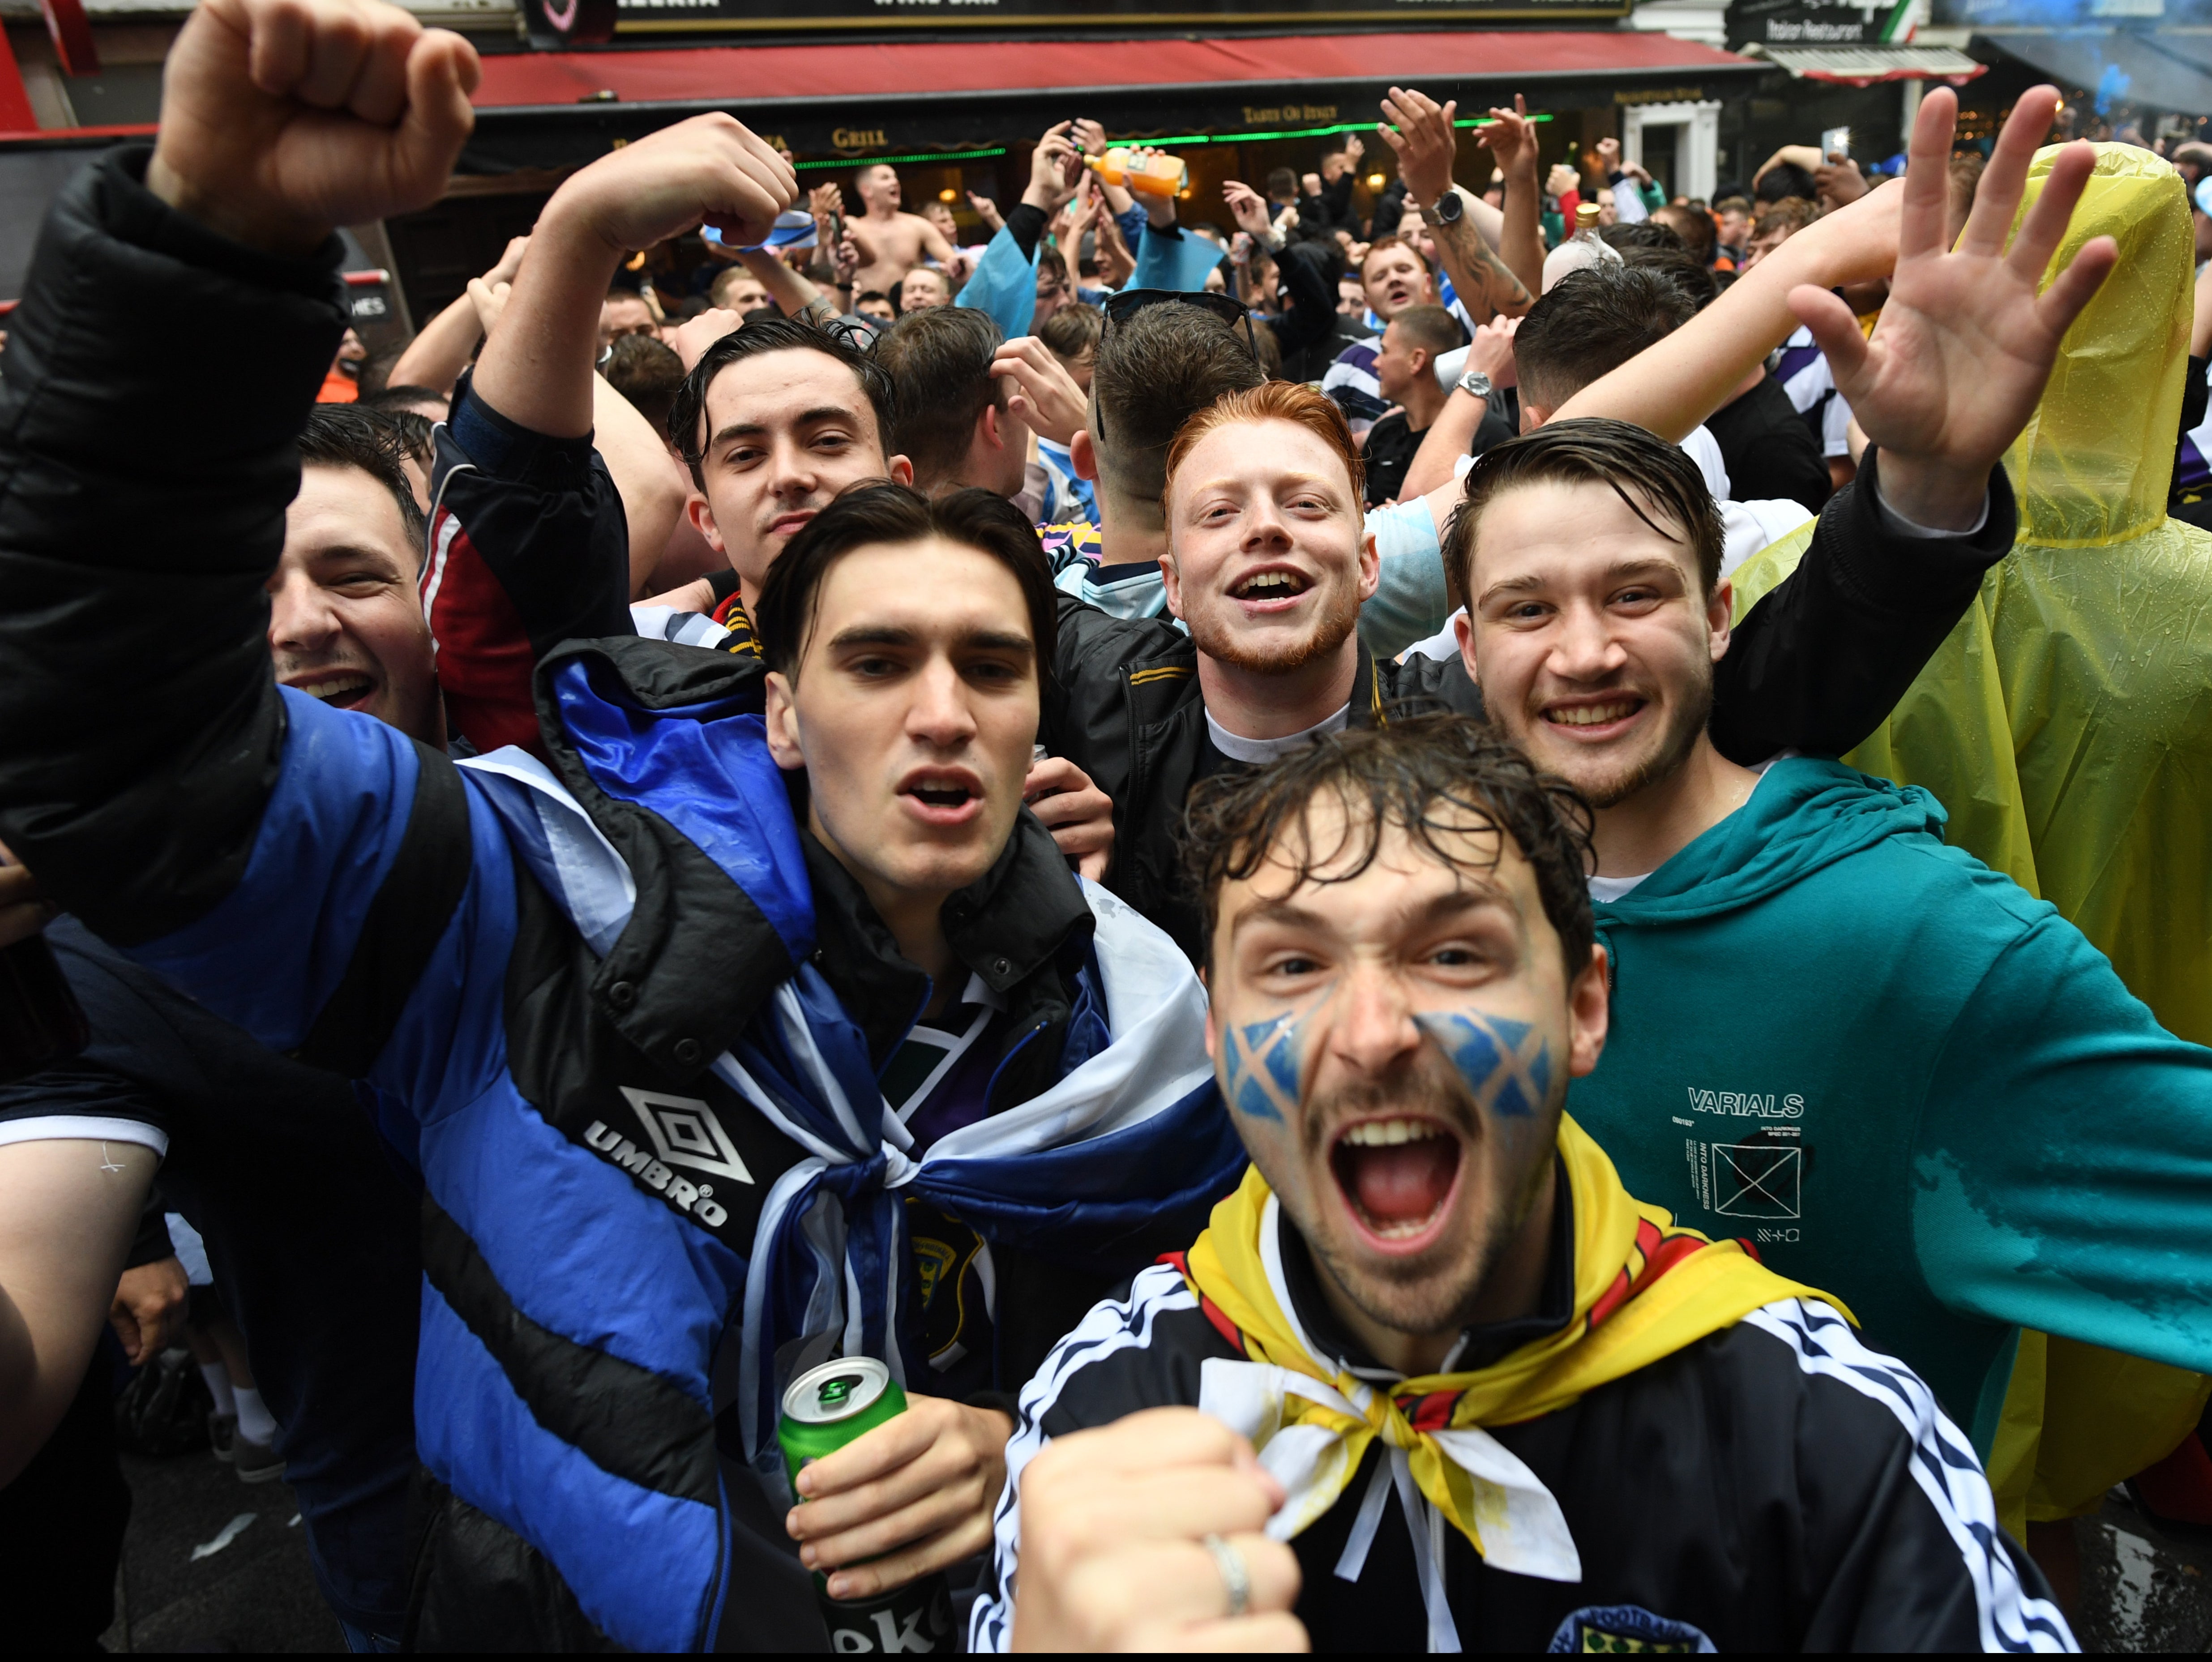 Scotland fans gather in Leicester Square before England vs Scotland match at Euro 2020